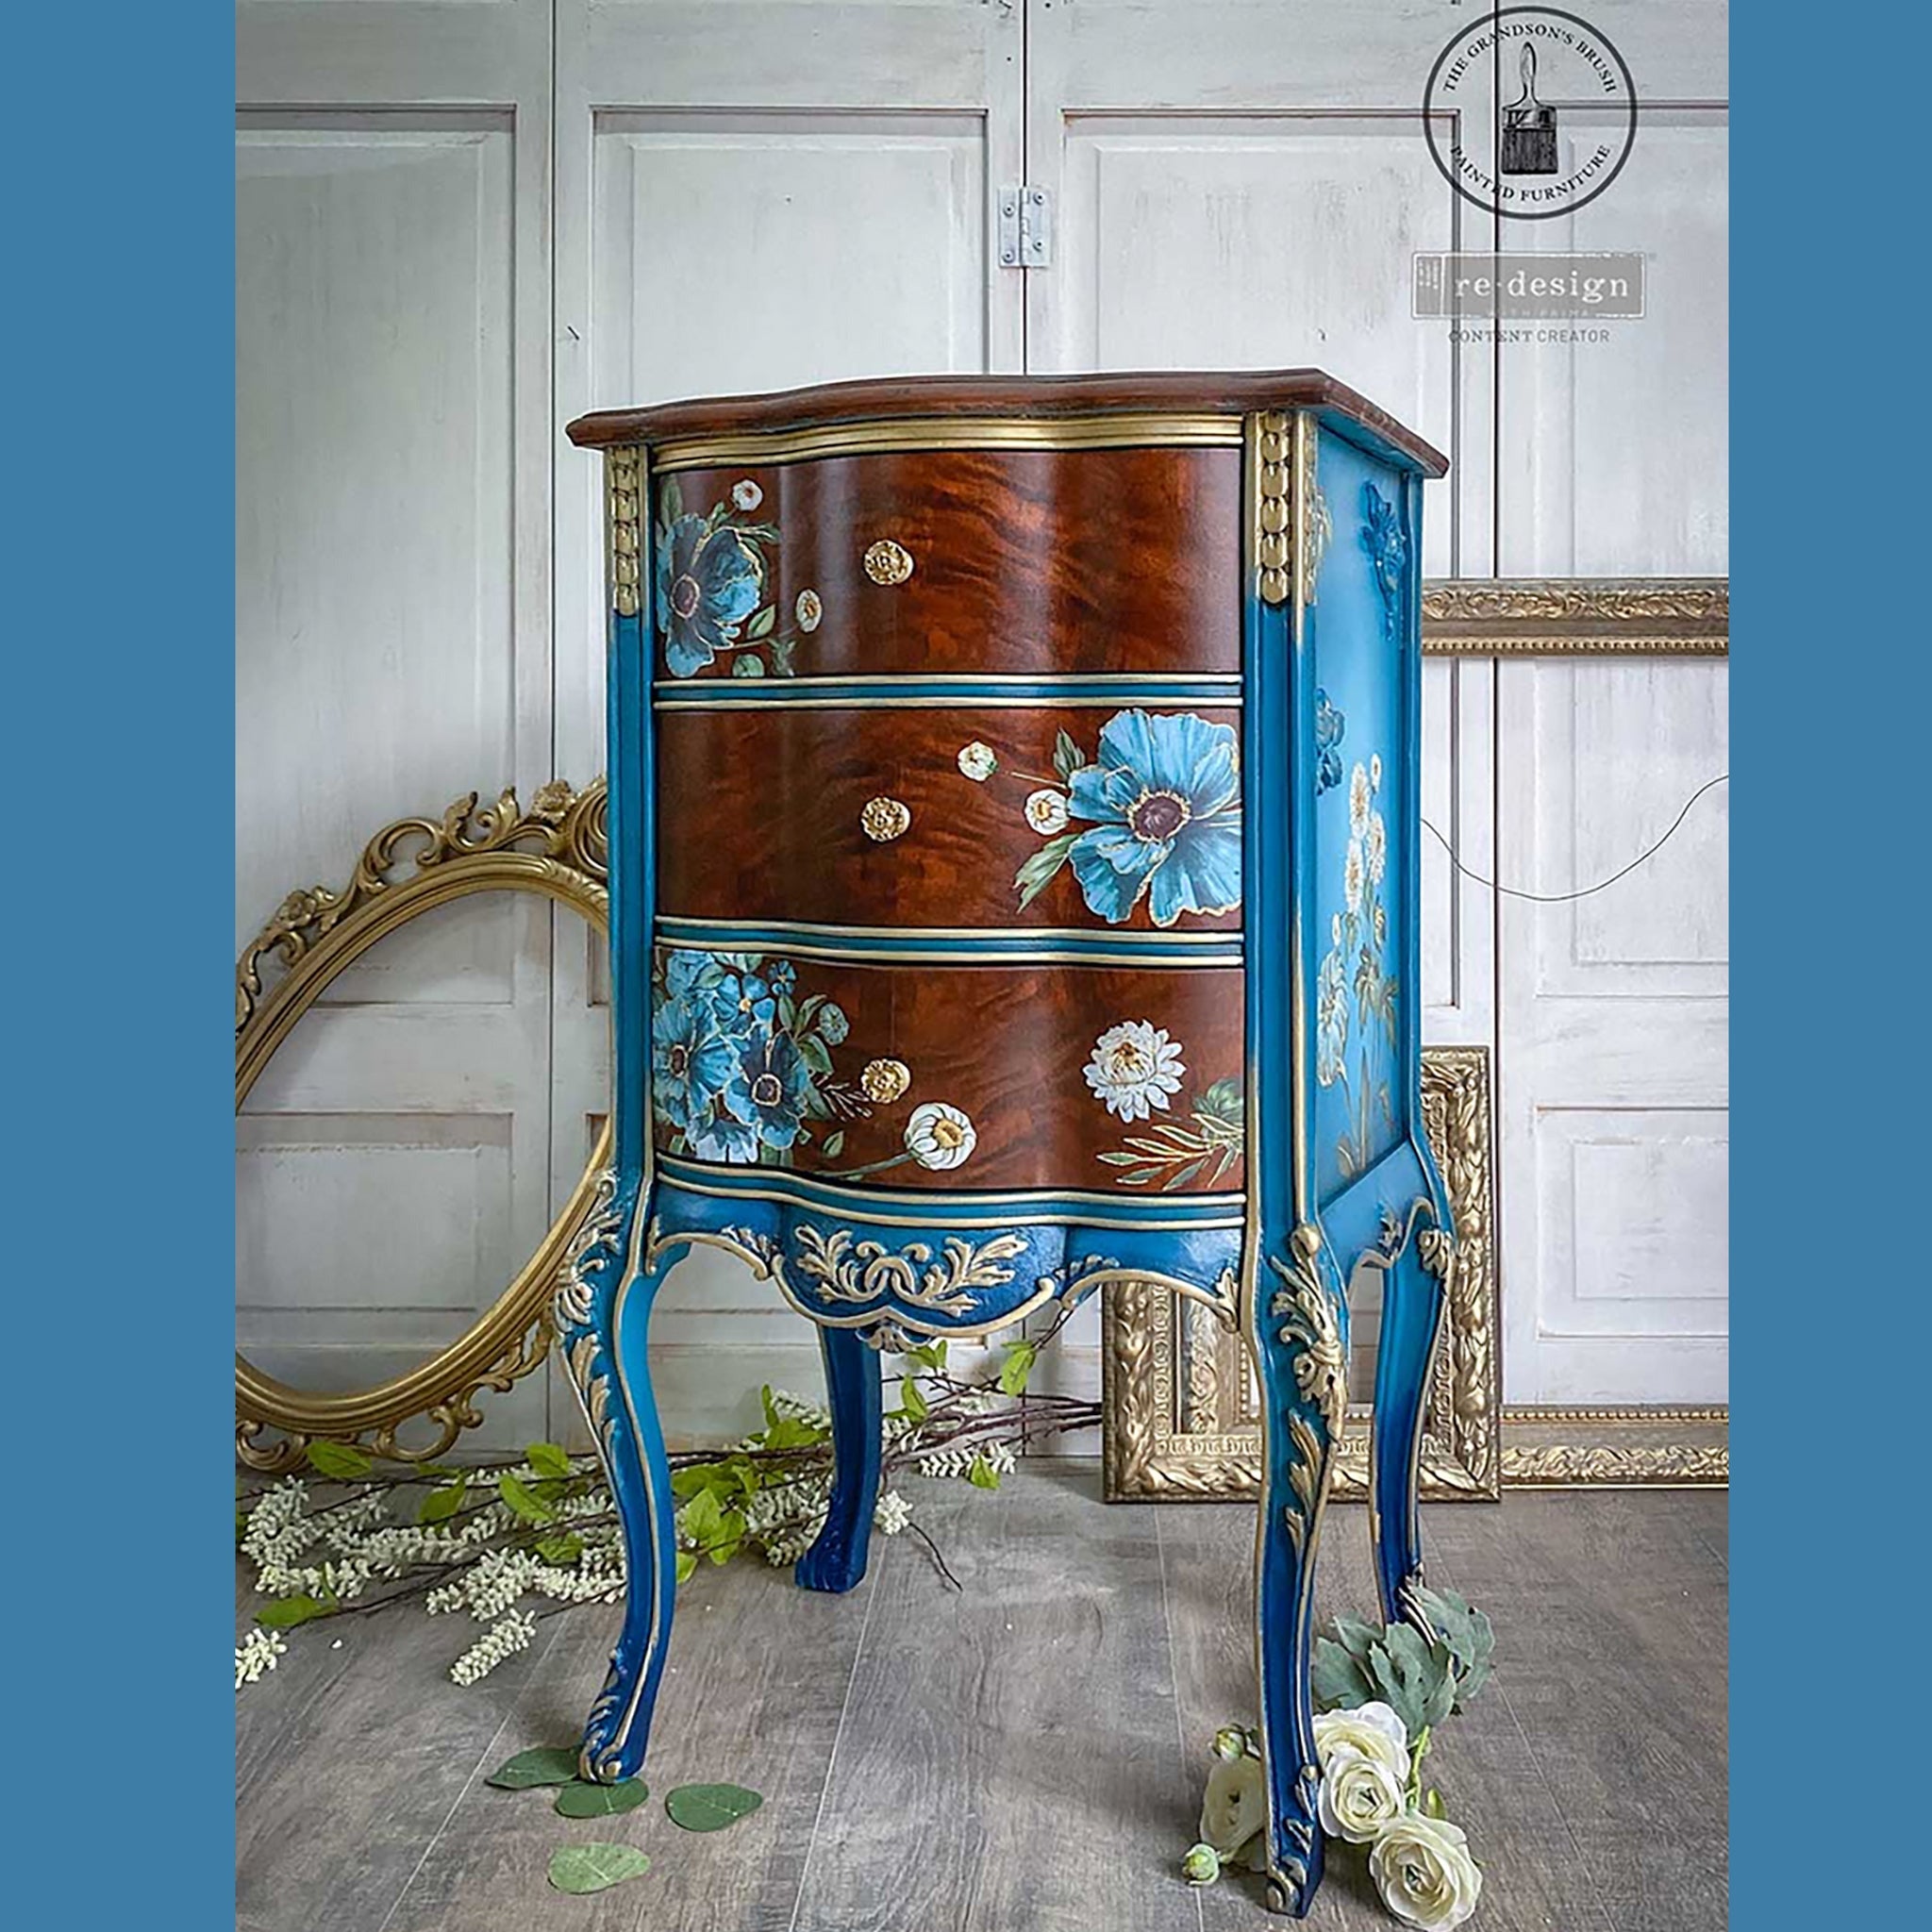 A small 3-drawer nightstand refurbished by The Grandson's Brush is painted blue with gold accents and features Gilded Floral on the sides and on its natural wood stained drawers.